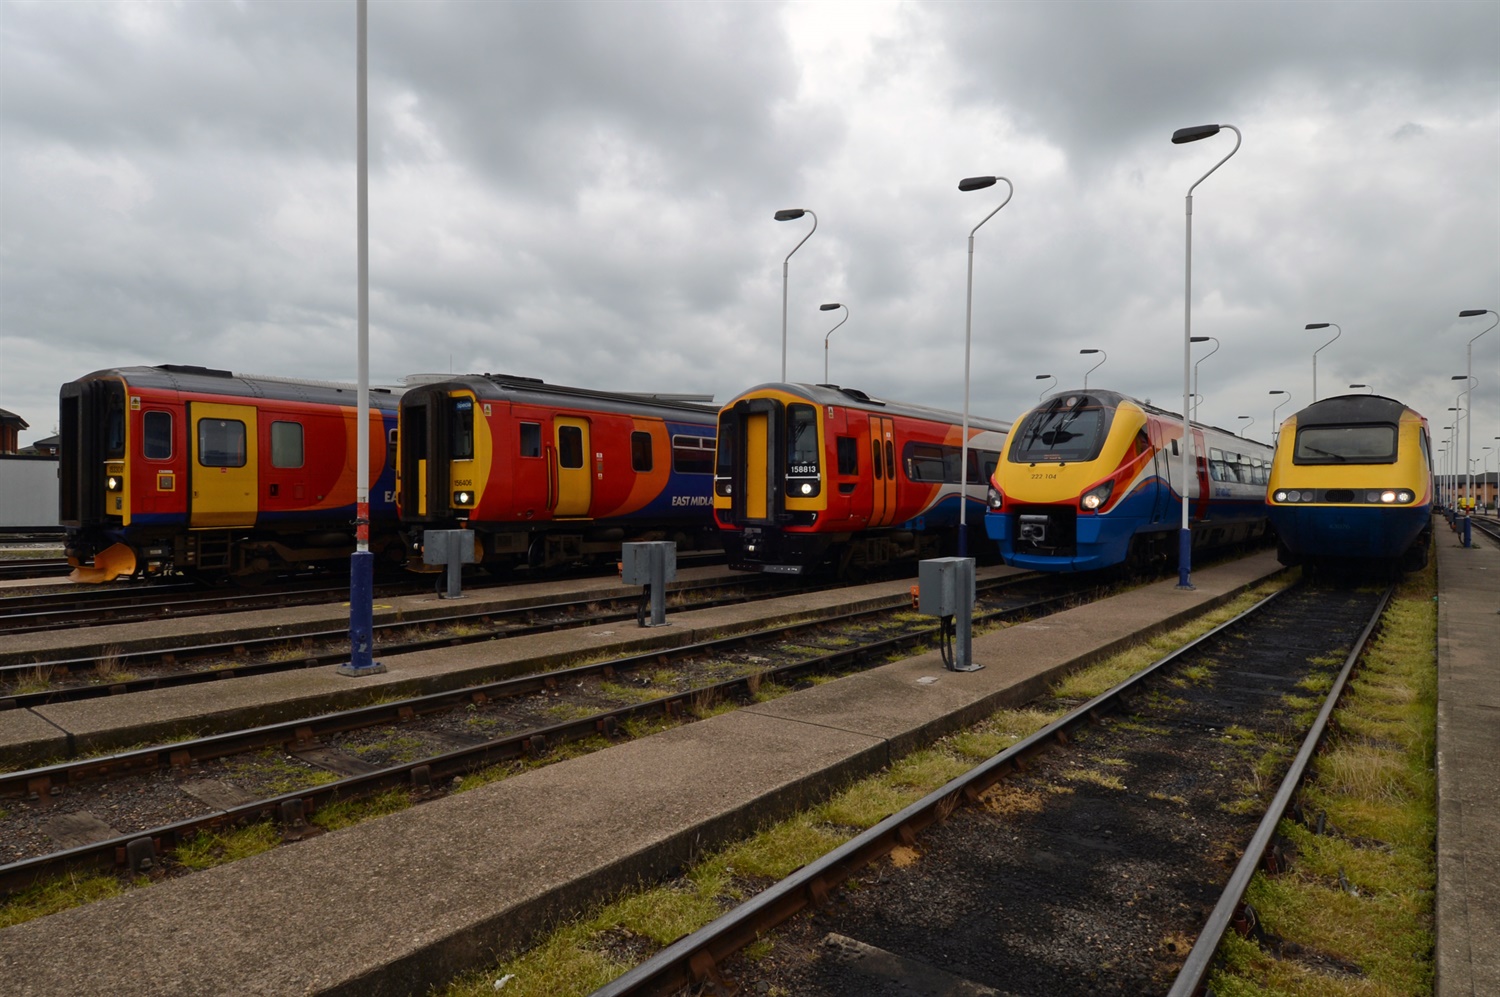 RAIB investigation after train collides with boom at Barrow-on-Soar